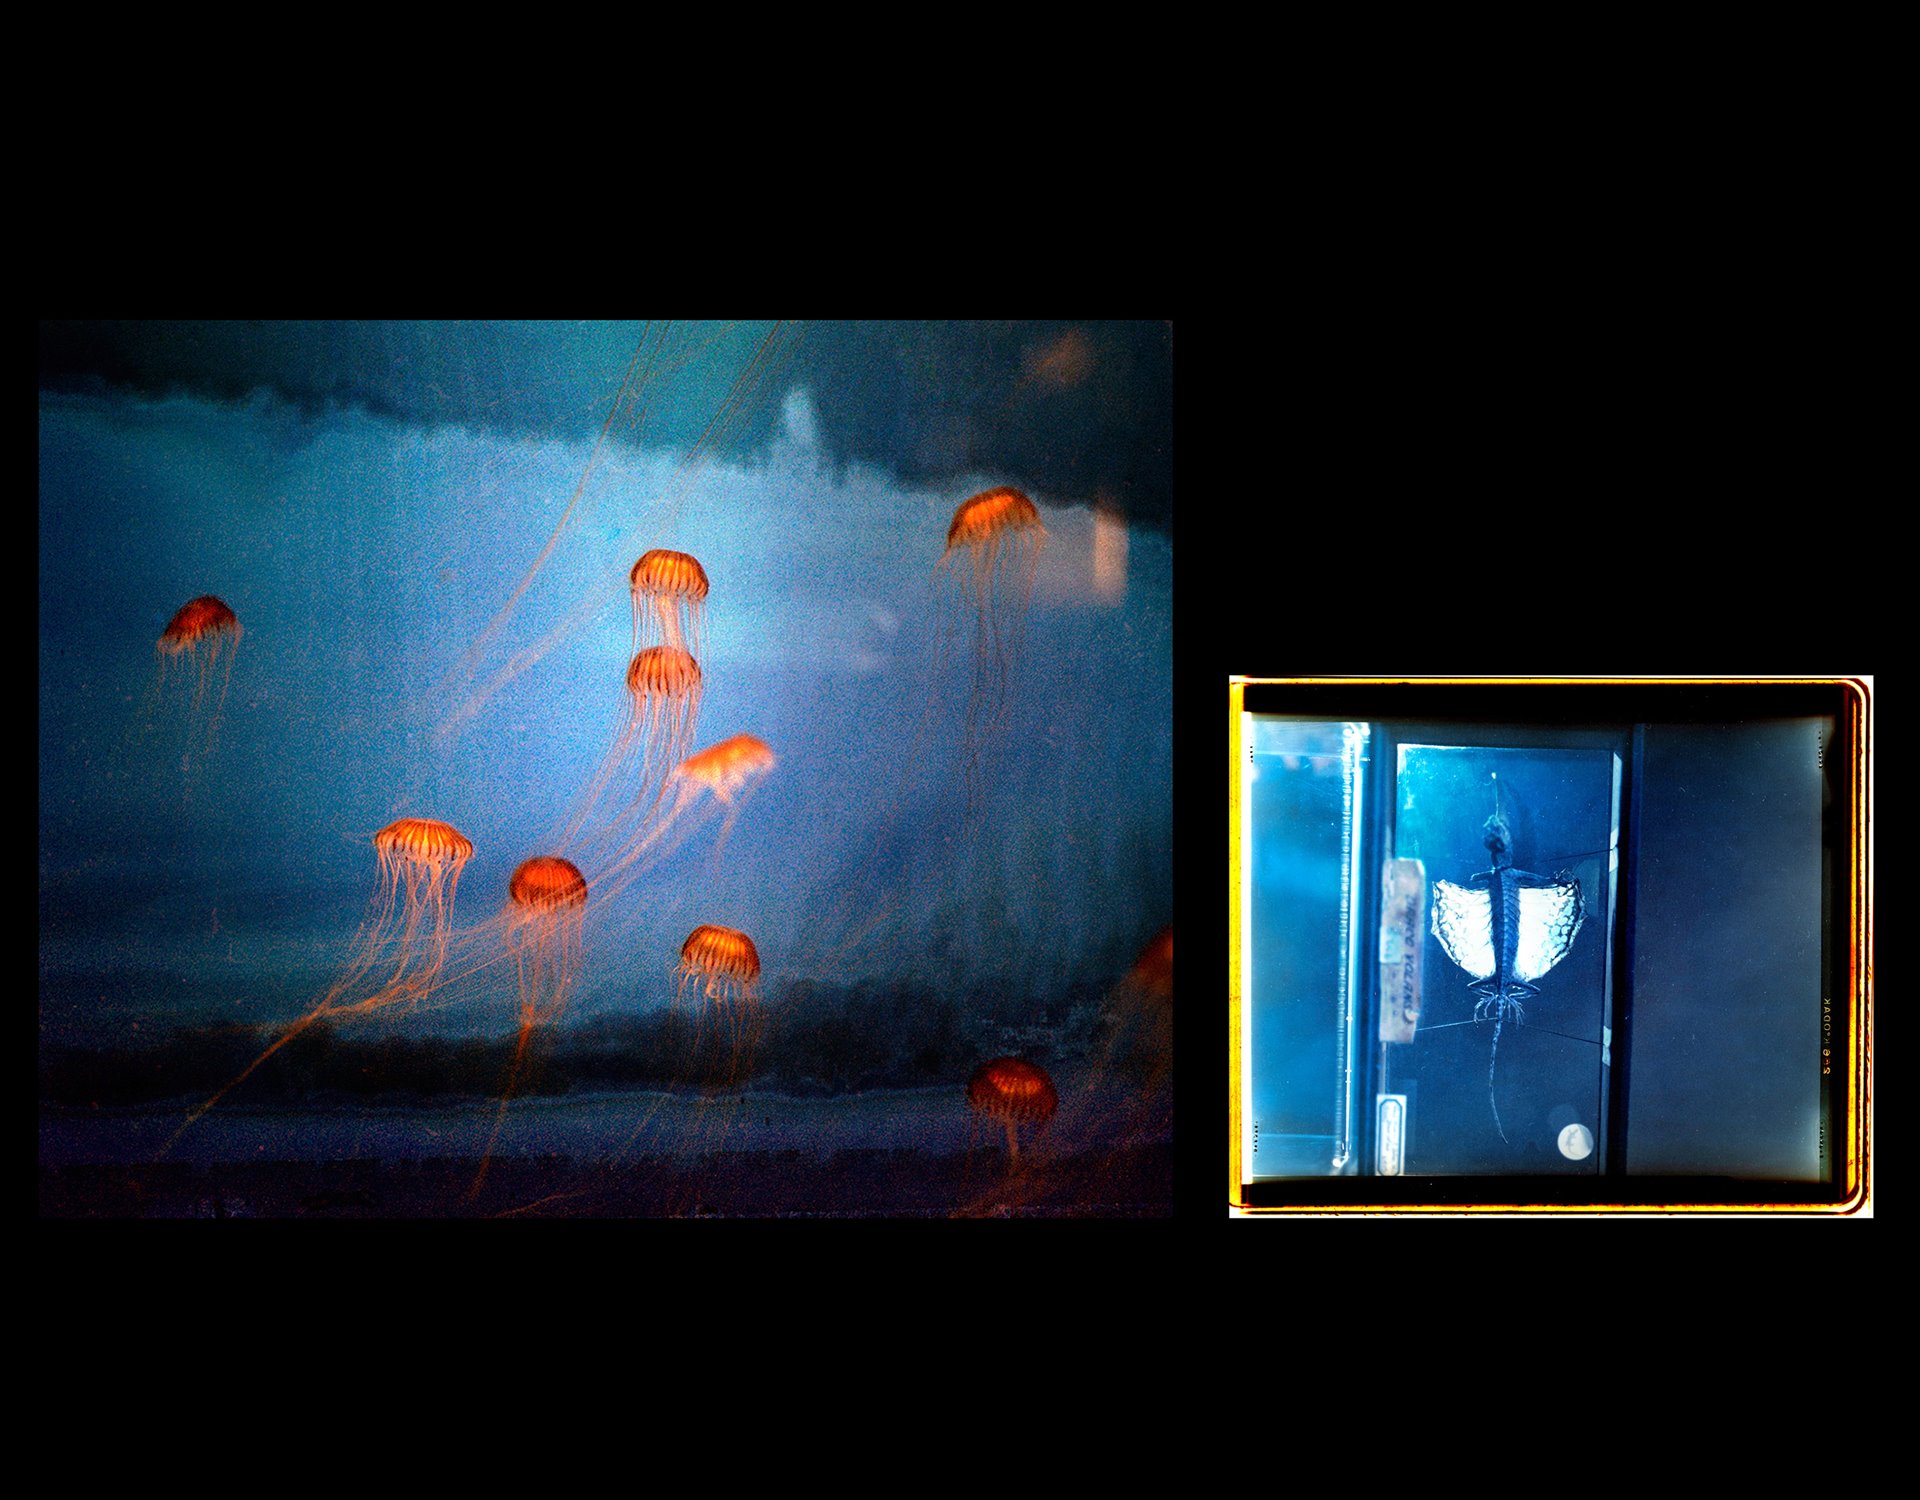 (Left) Pacific Sea nettle Jellyfish. These Jellyfish have been found off the coast of Australia and are also kept in British Museum collections. The image was made using a large format camera and hand printed in the colour darkroom by the photographer. &nbsp;(Right) A flying lizard from the Grant Museum of Zoology, London, United Kingdom. The image was made using a large format camera and then hand printed in the colour darkroom by the photographer.&nbsp;